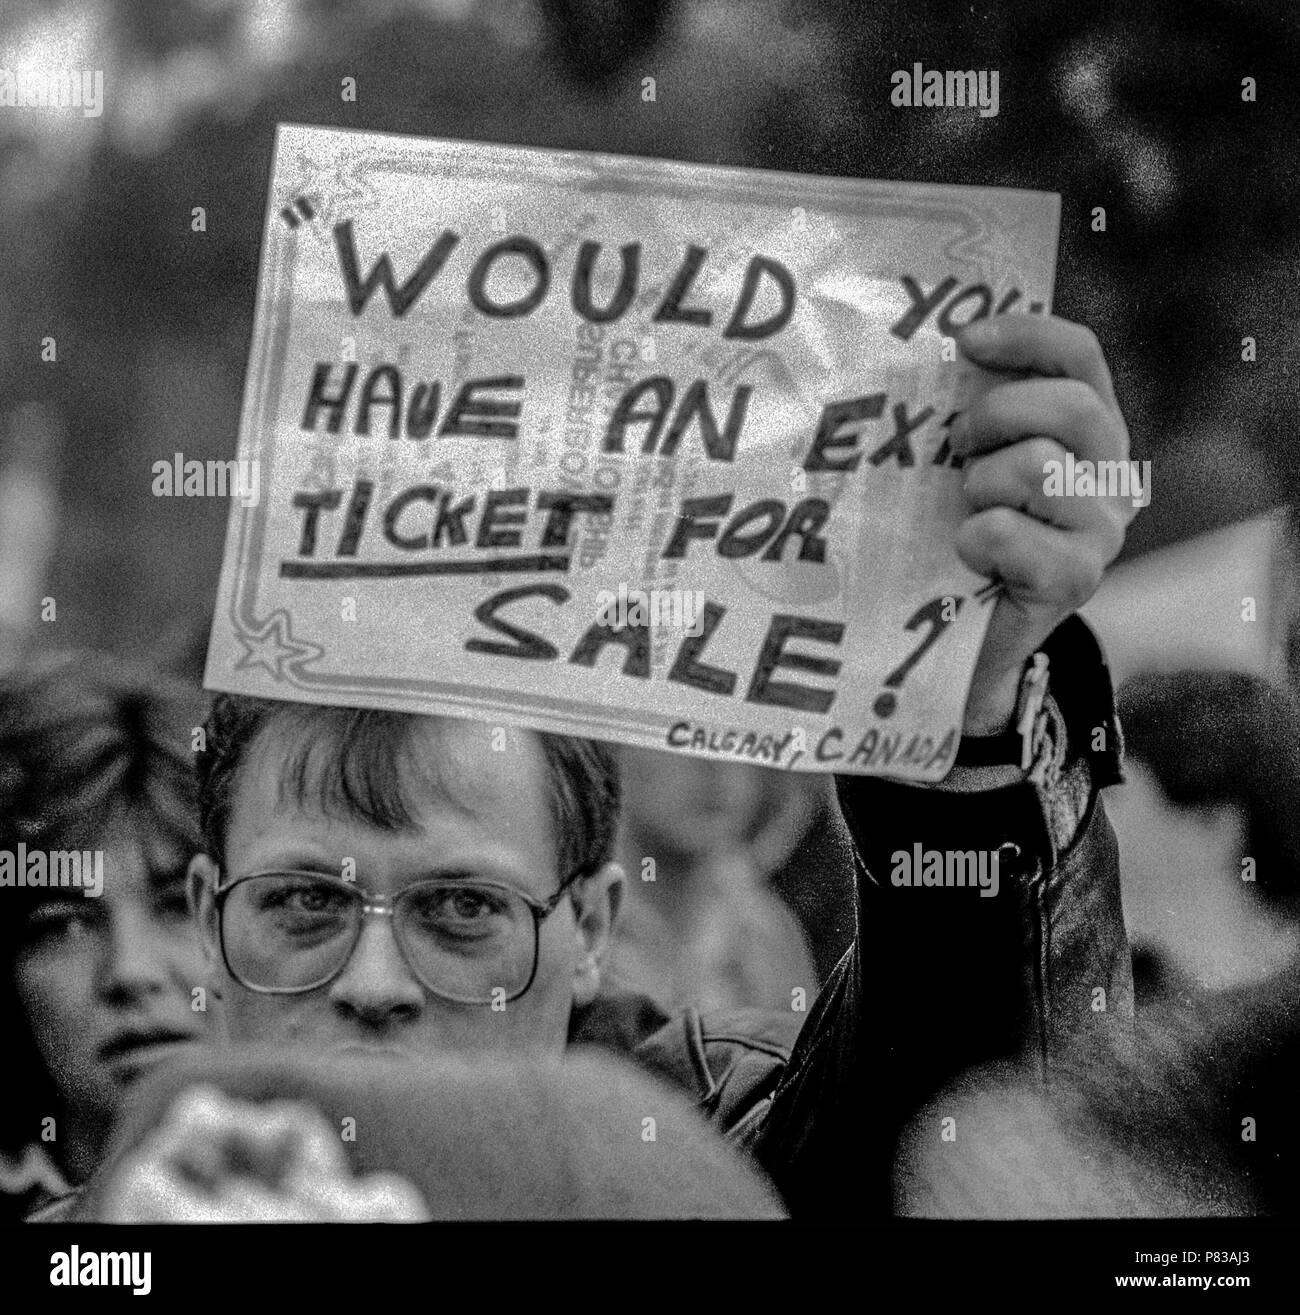 Stanford, California, USA. 20th Jan, 1985. Fan with sign wants a ticket at the Super Bowl XIX tailgate on the Stanford University campus. The San Francisco 49ers defeated the Miami Dolphins 38-16 on Sunday, January 20, 1985. Credit: Al Golub/ZUMA Wire/Alamy Live News Stock Photo